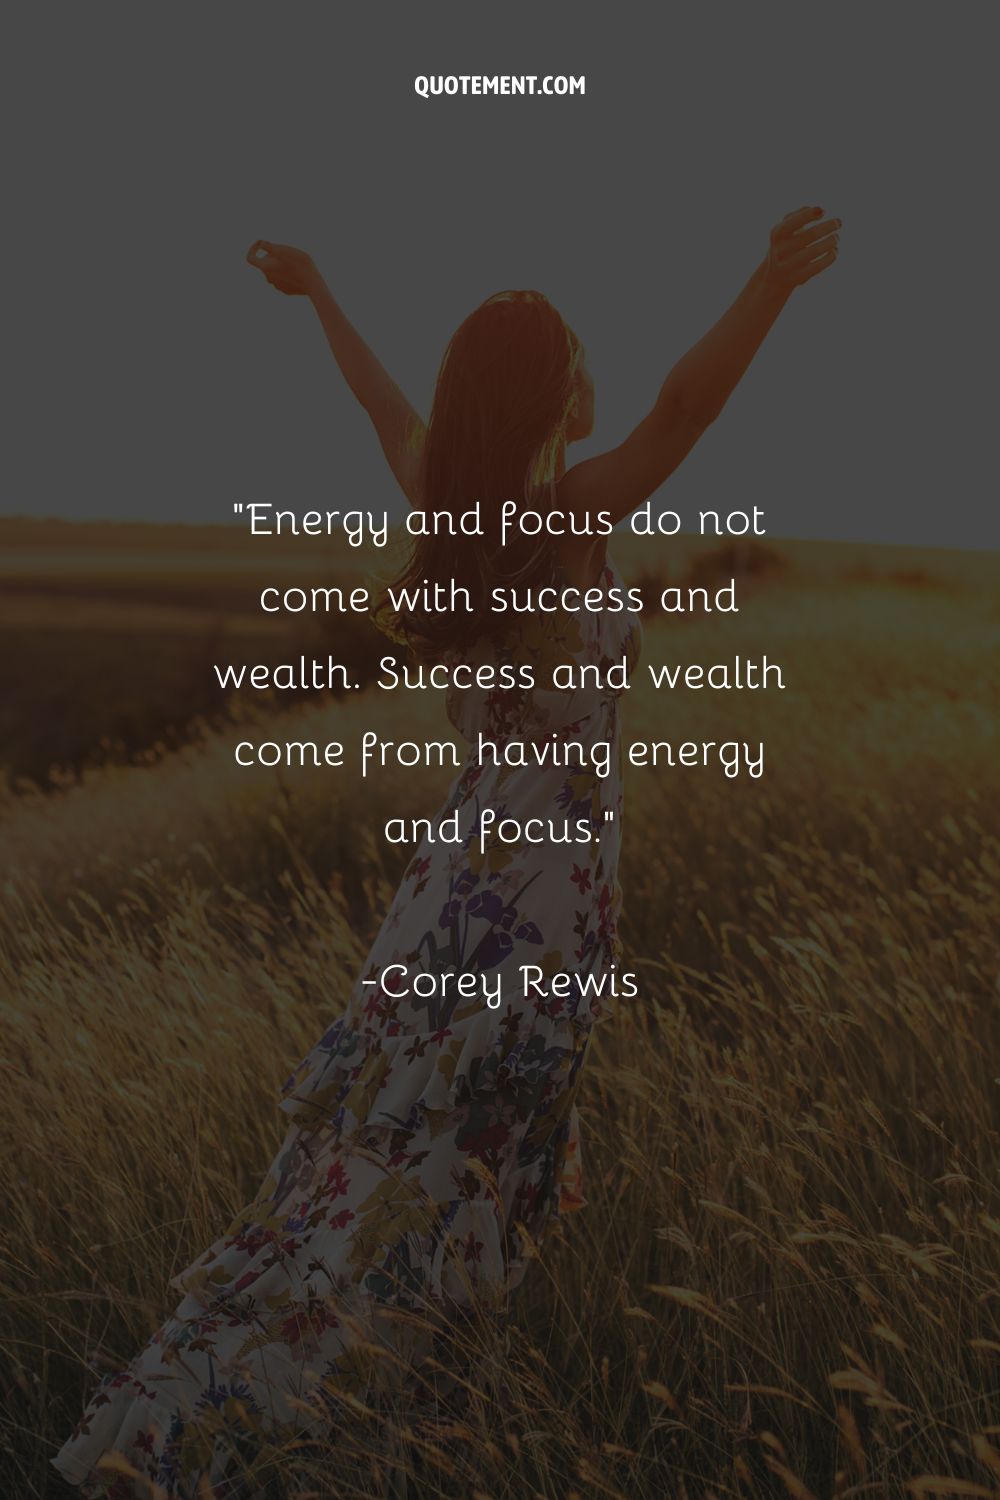 Energy and focus do not come with success and wealth. Success and wealth come from having energy and focus